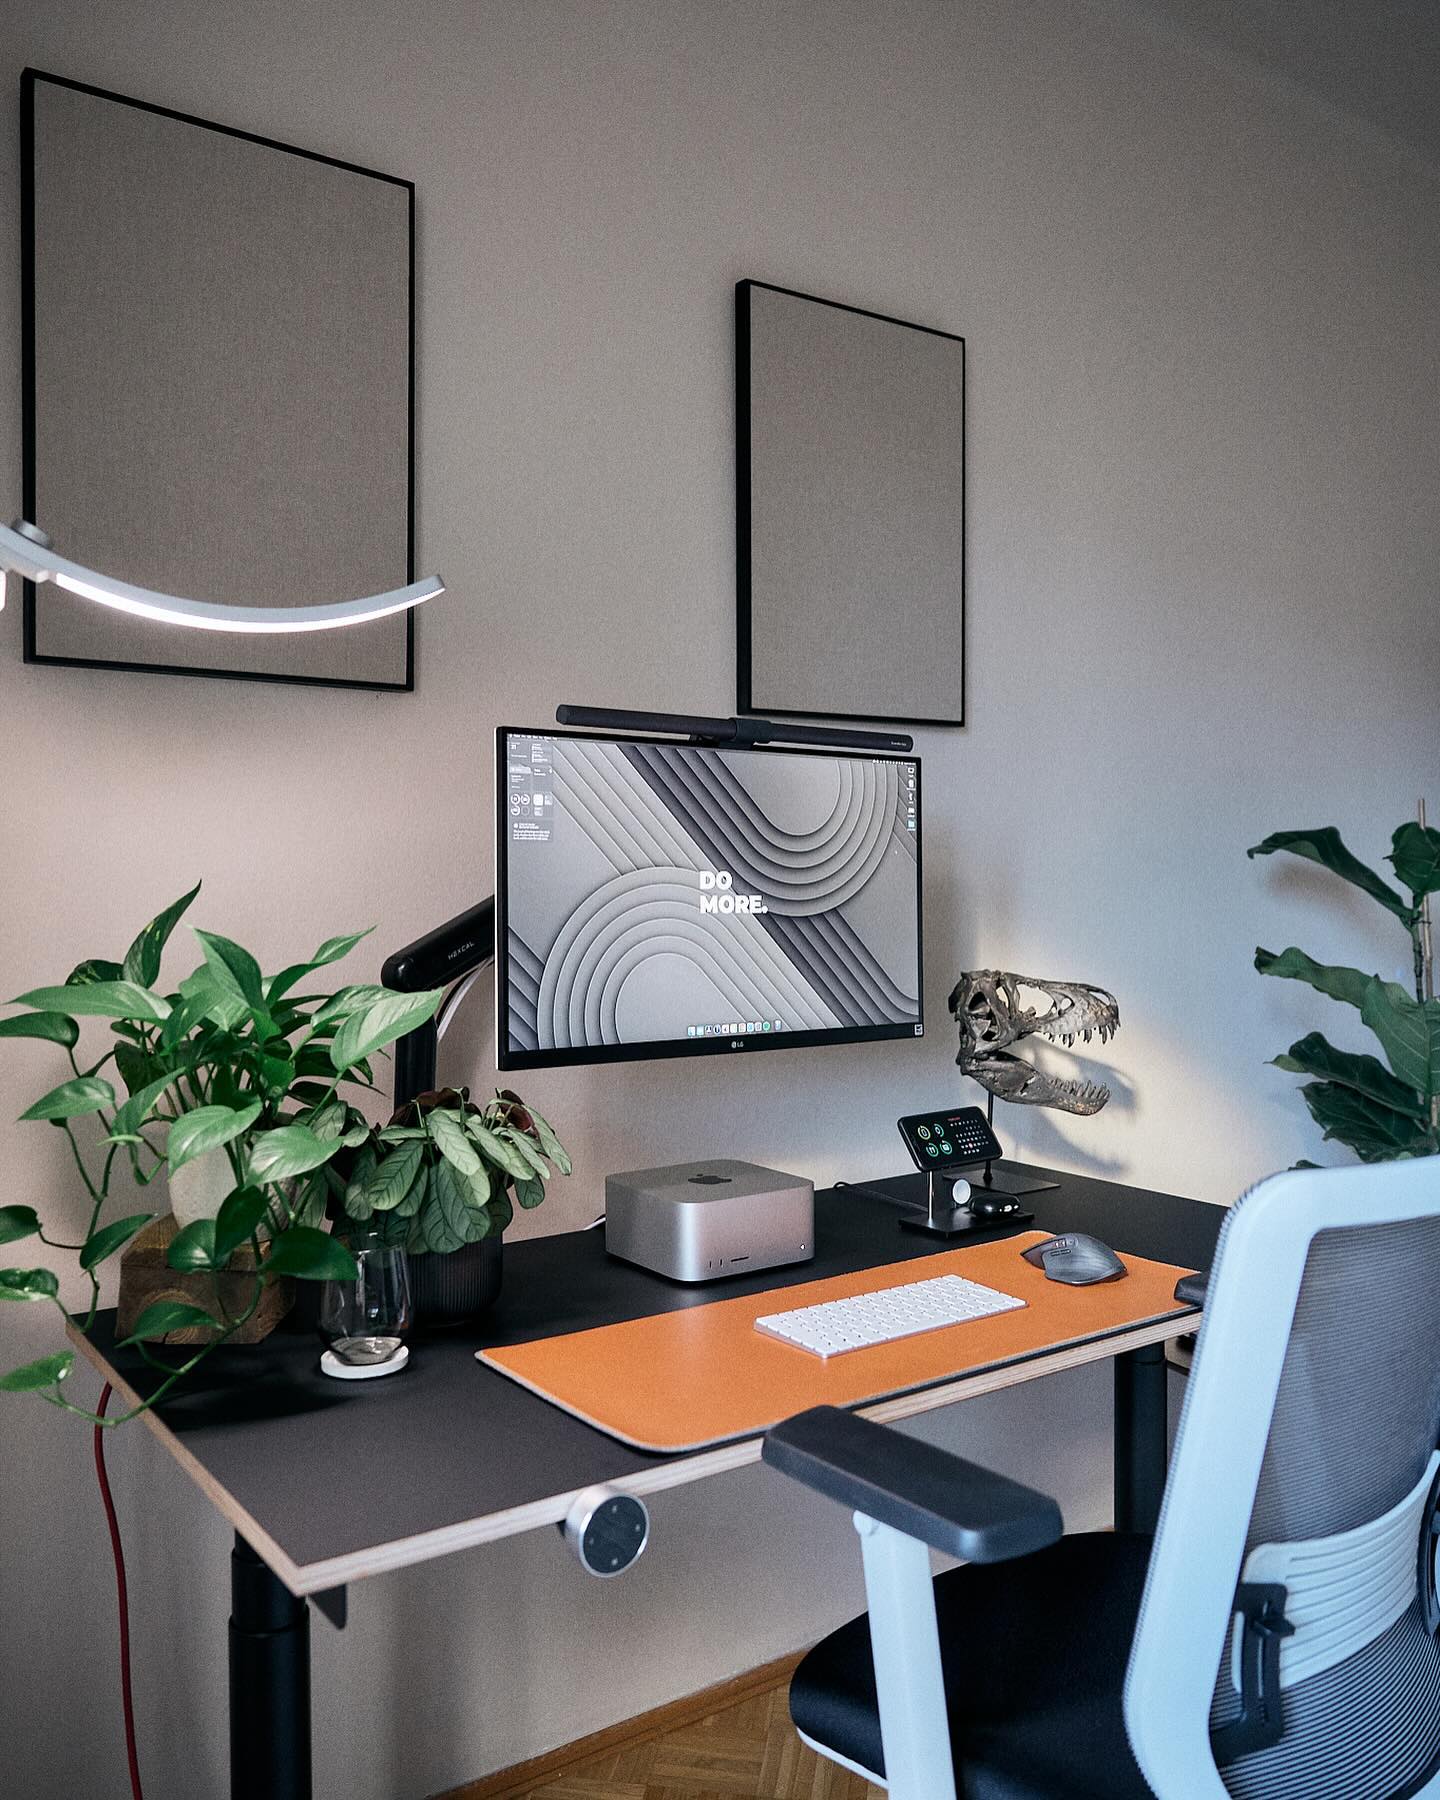 An organised office space with a standing desk, displaying a computer with an inspirational wallpaper, a Mac Studio, a smartphone on a dock, and vibrant desk accessories, complemented by indoor plants and modern wall art